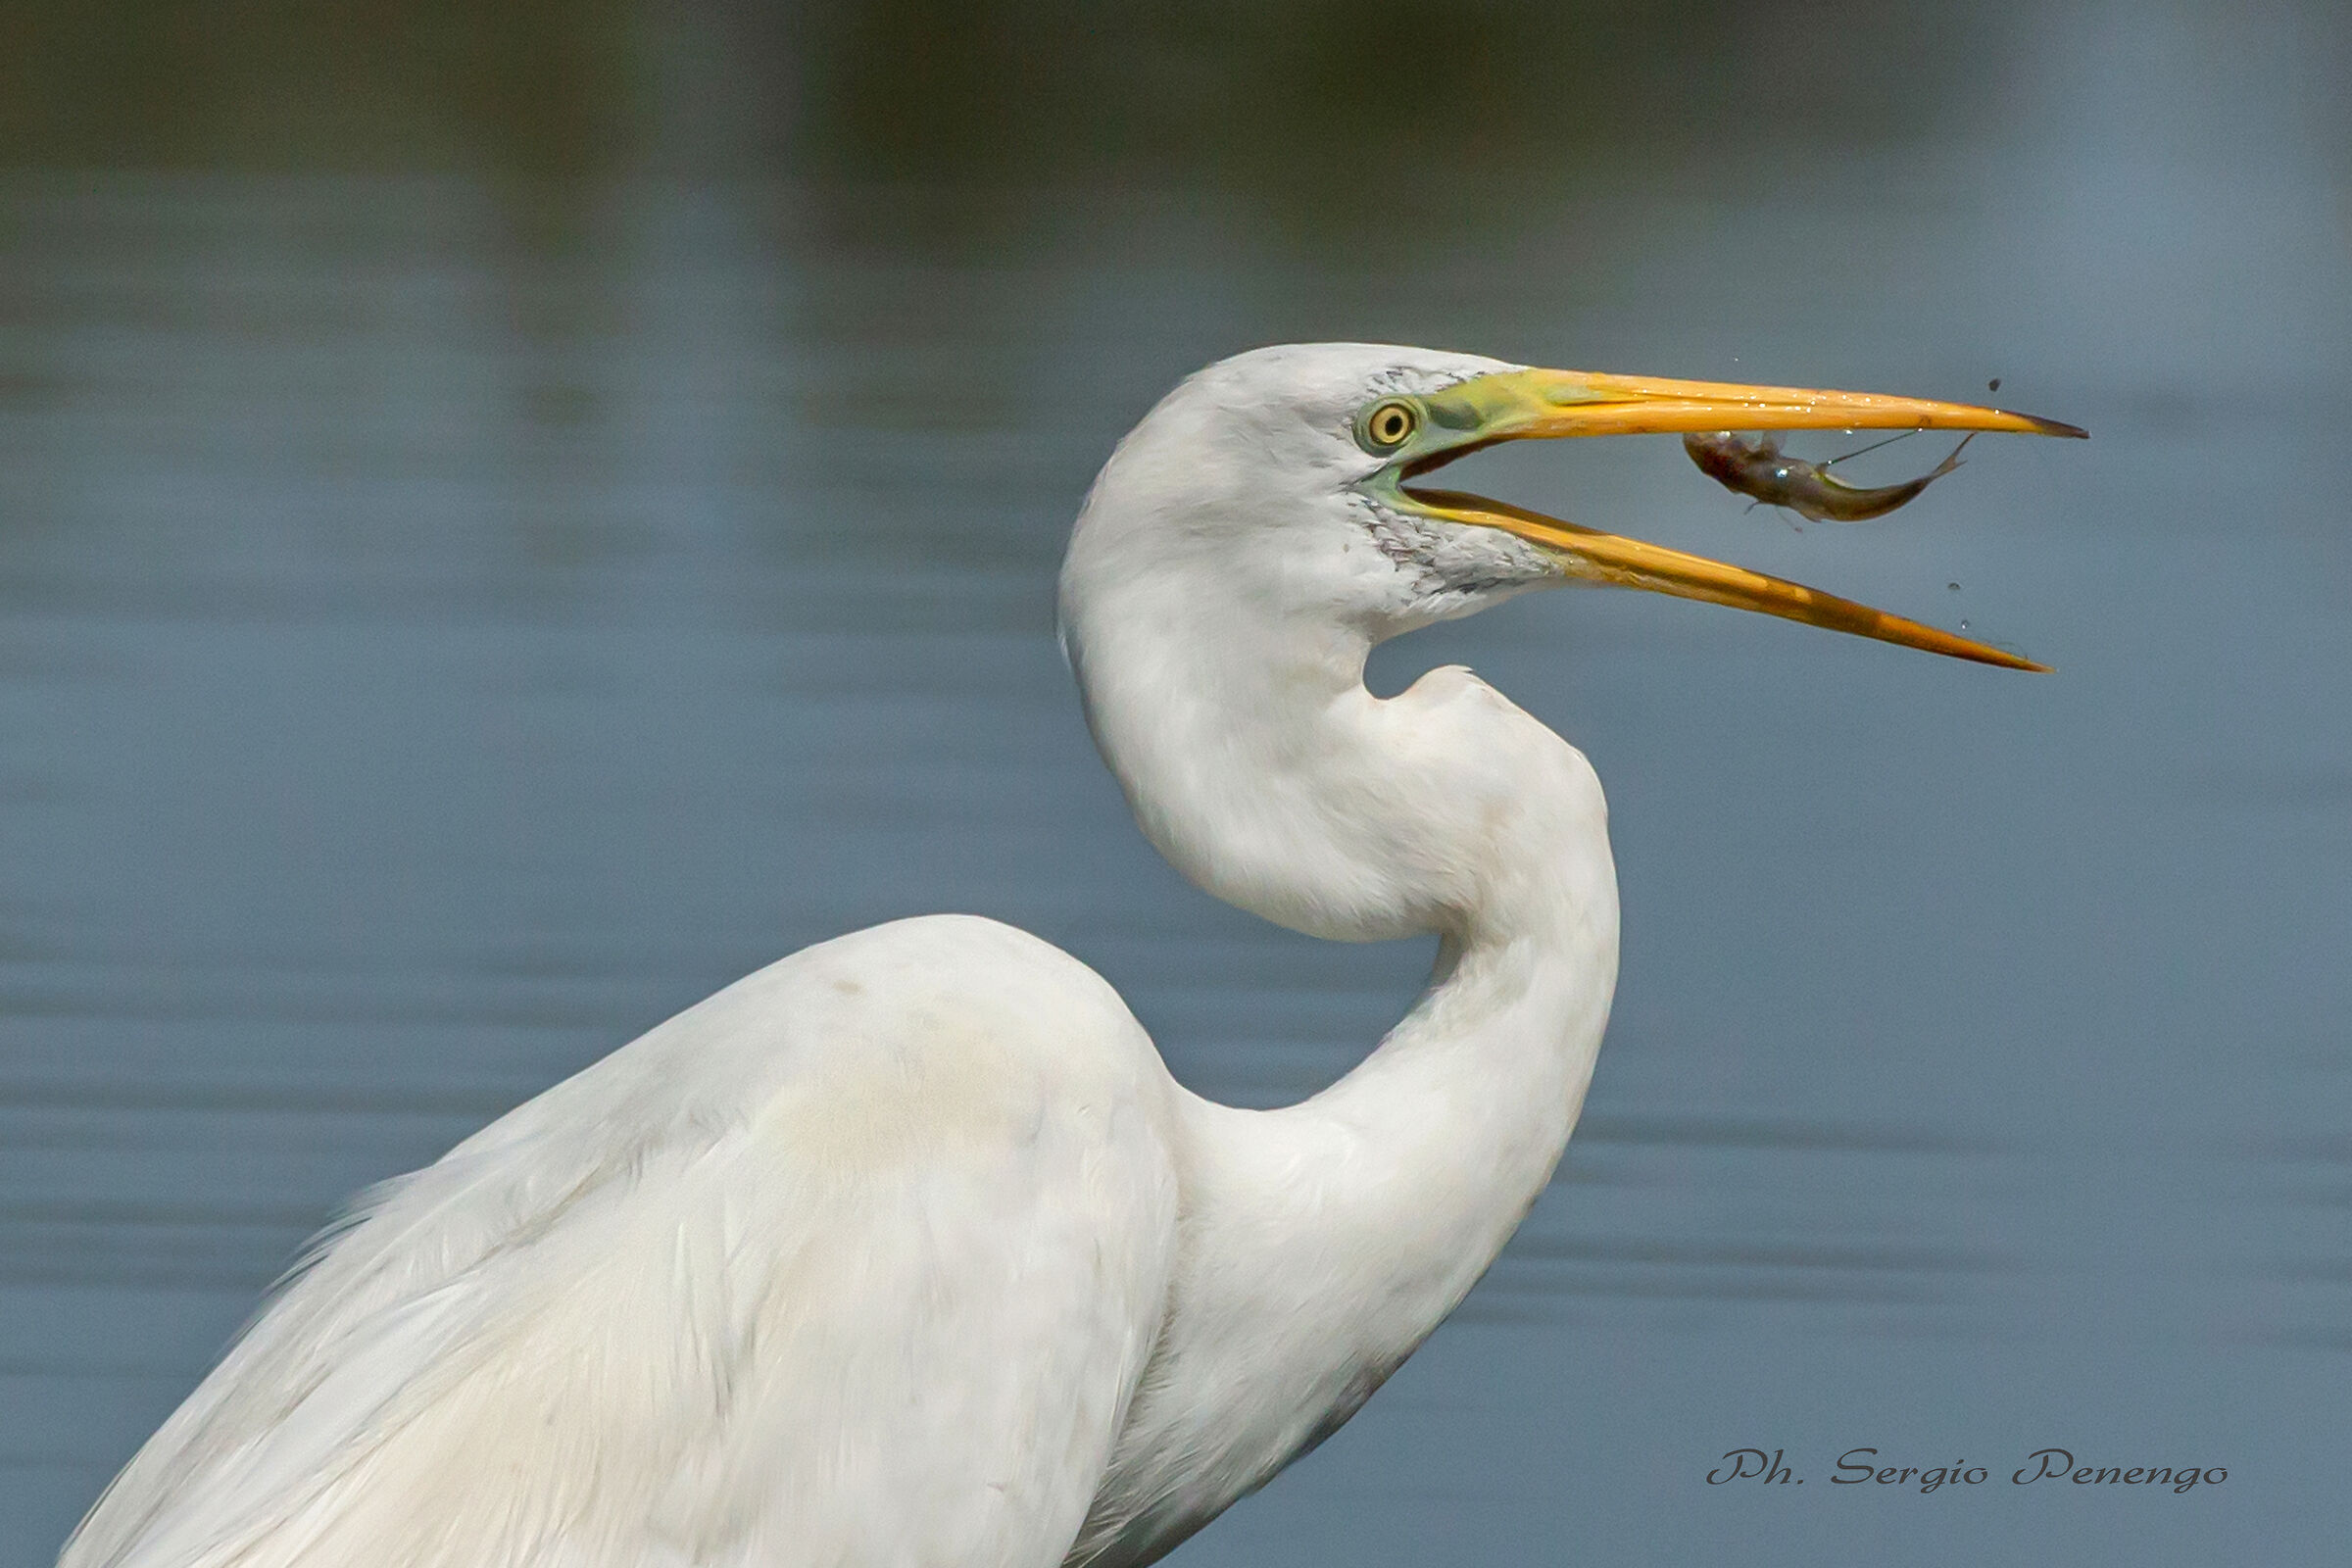 The Fishing Of the Great White Heron...